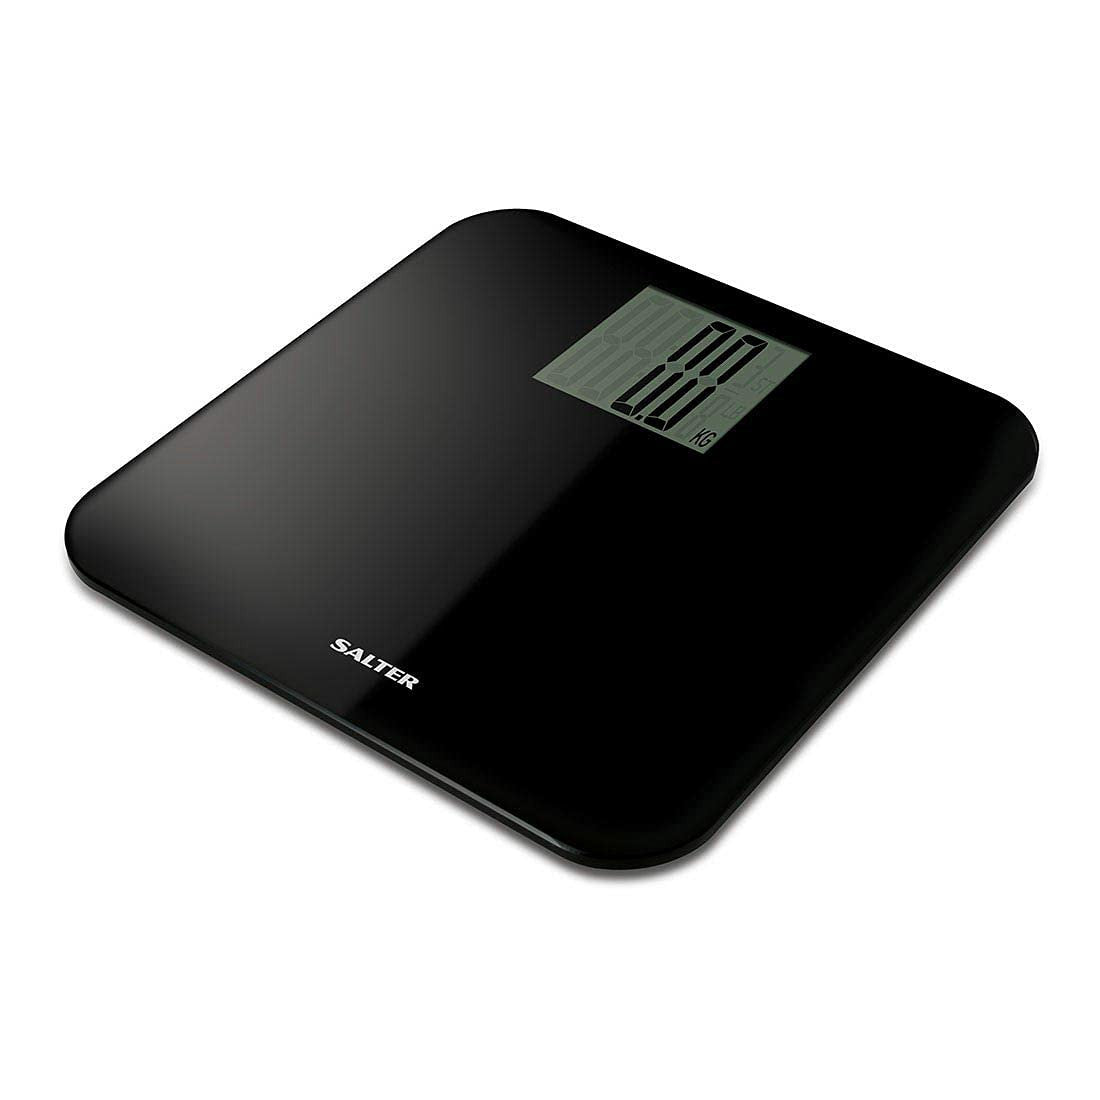 Salter Max Electronic Bathroom Scale: 9049 BK3R